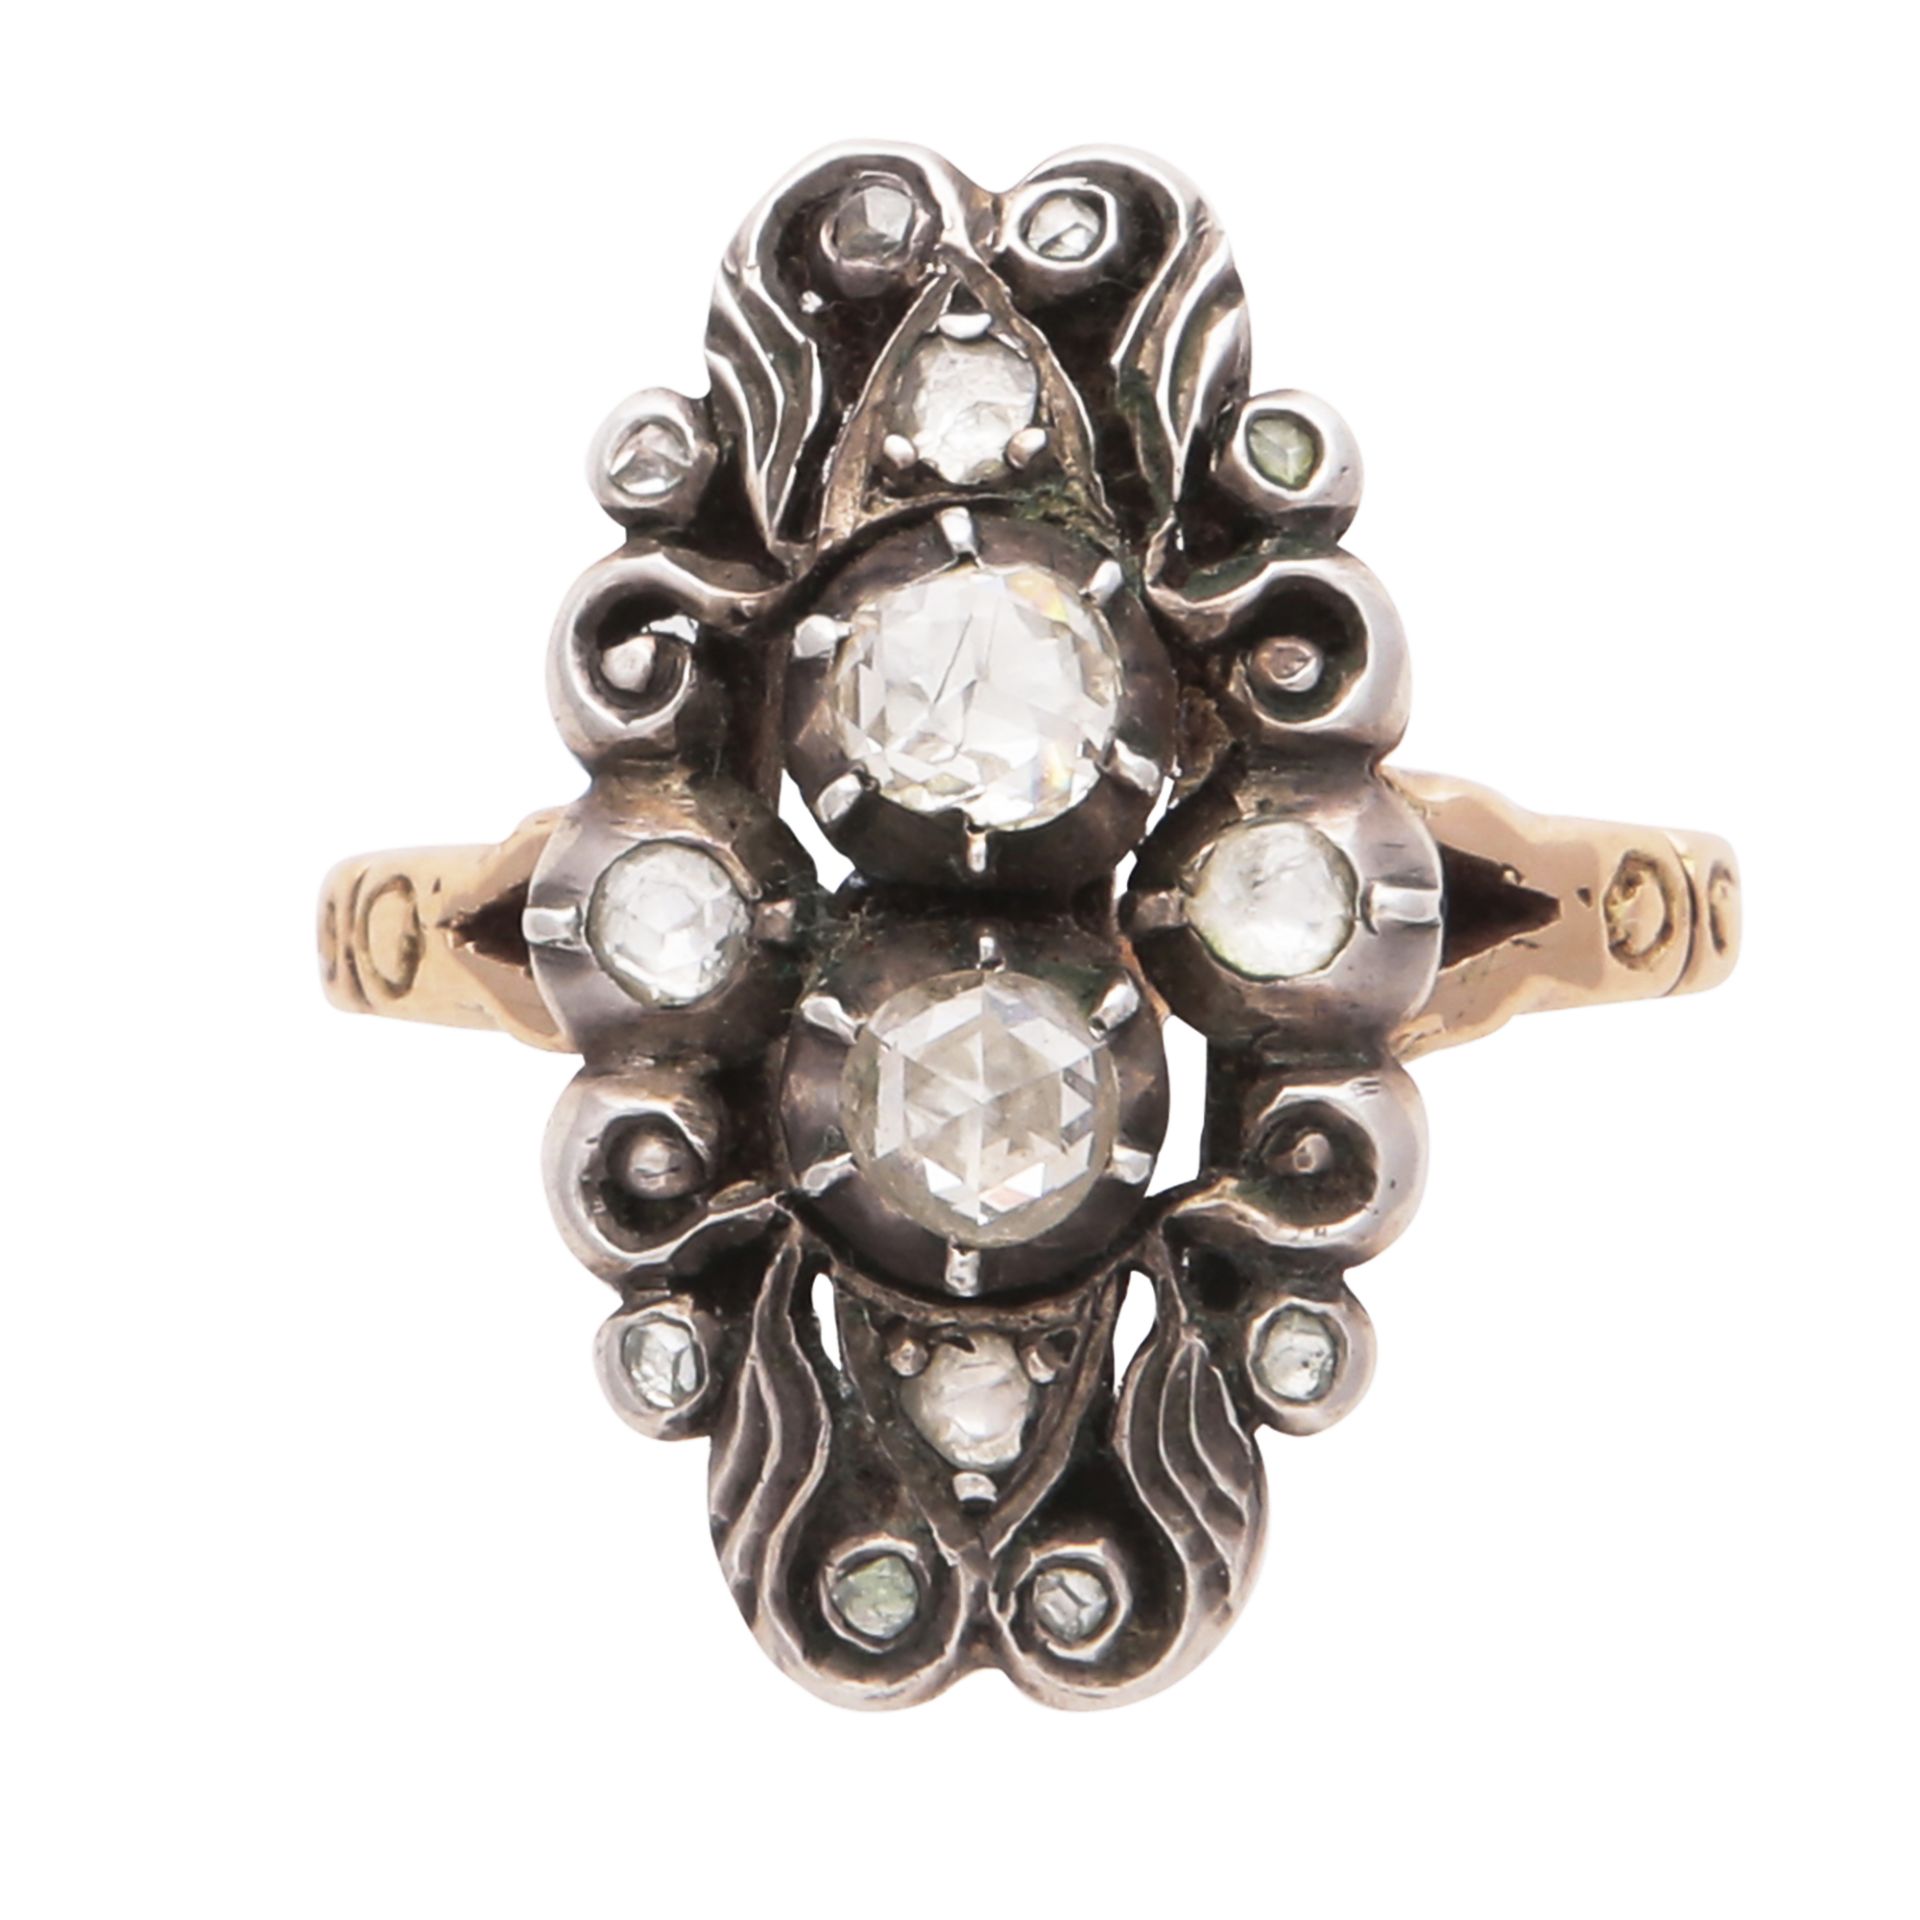 An antique Georgian diamond ring in yellow gold and silver designed as two central rose cut diamonds